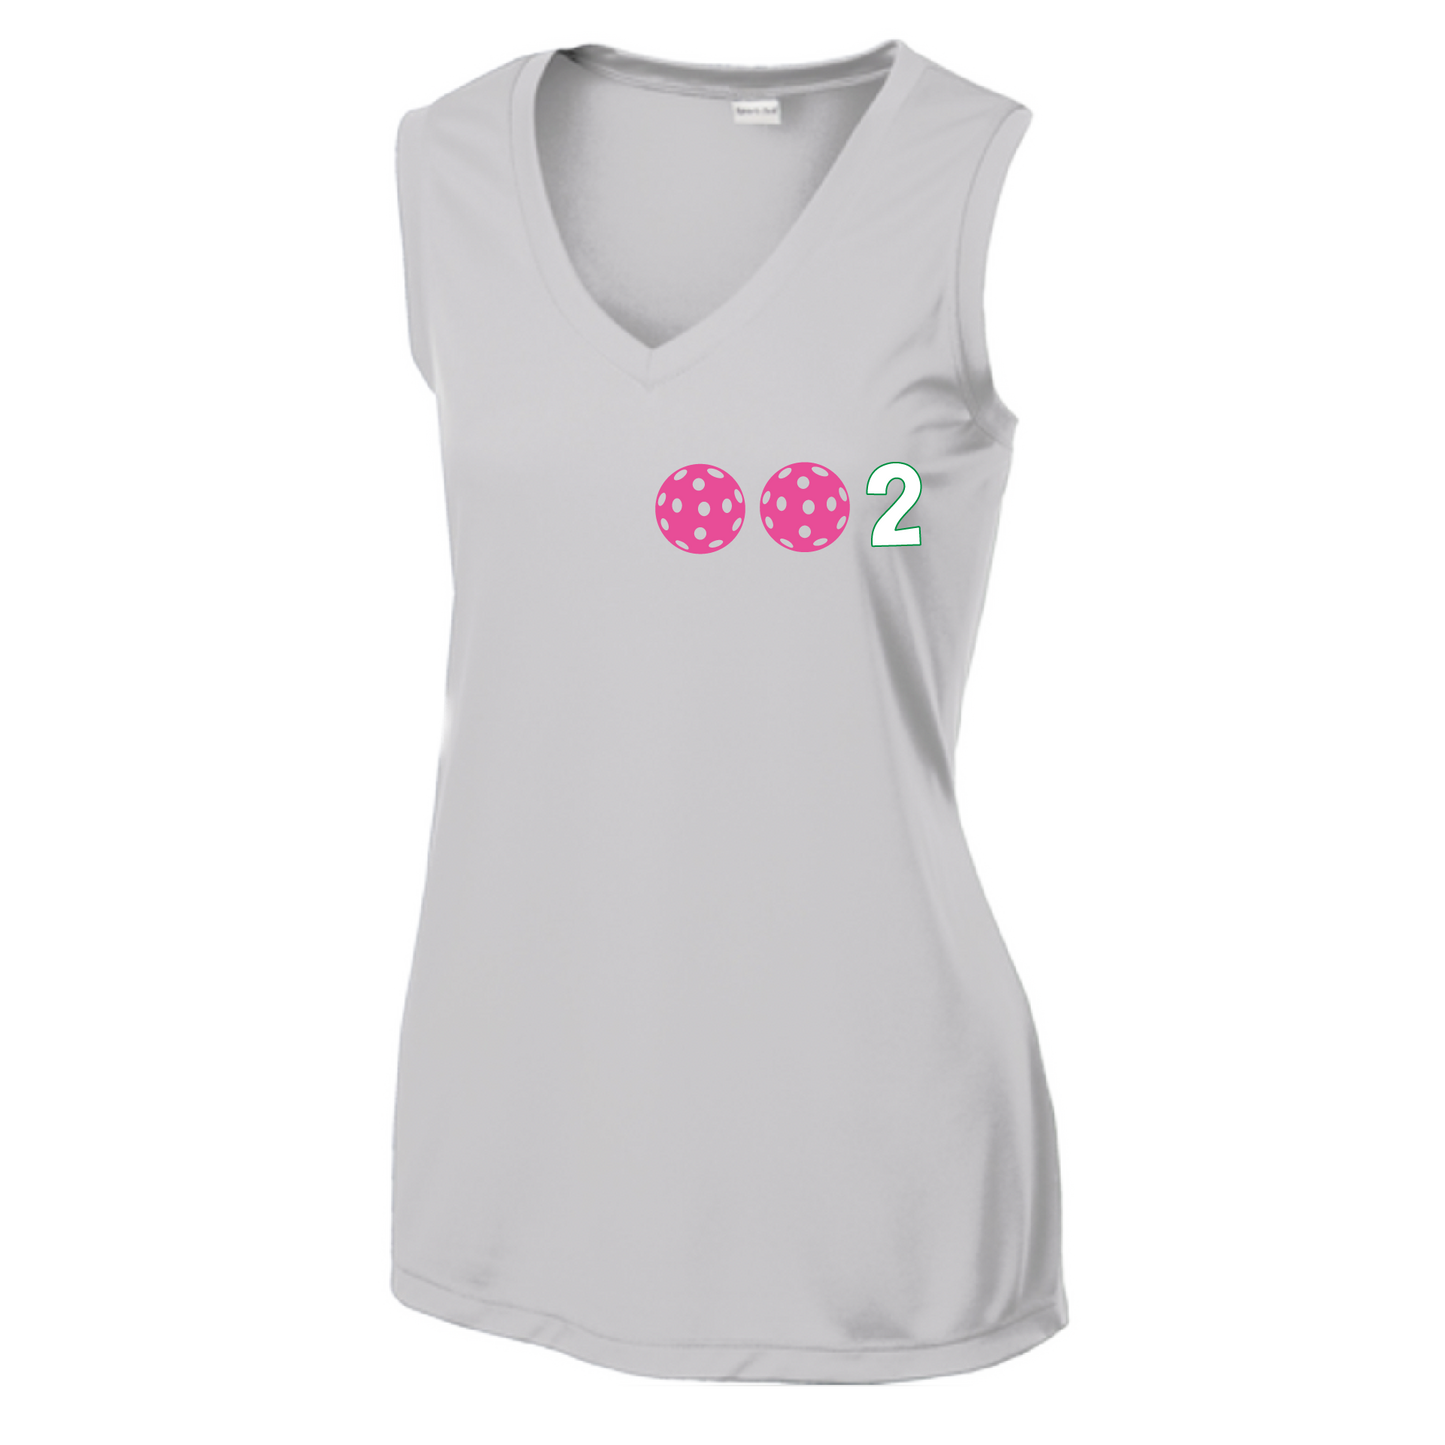 Design: 002 with Customizable Pickleball Ball Colors (Yellow, Green, White, Purple, Pink)  Women's Style: Sleeveless Tank  Shirts are lightweight, roomy and highly breathable. These moisture-wicking shirts are designed for athletic performance. They feature PosiCharge technology to lock in color and prevent logos from fading. Removable tag and set-in sleeves for comfort.